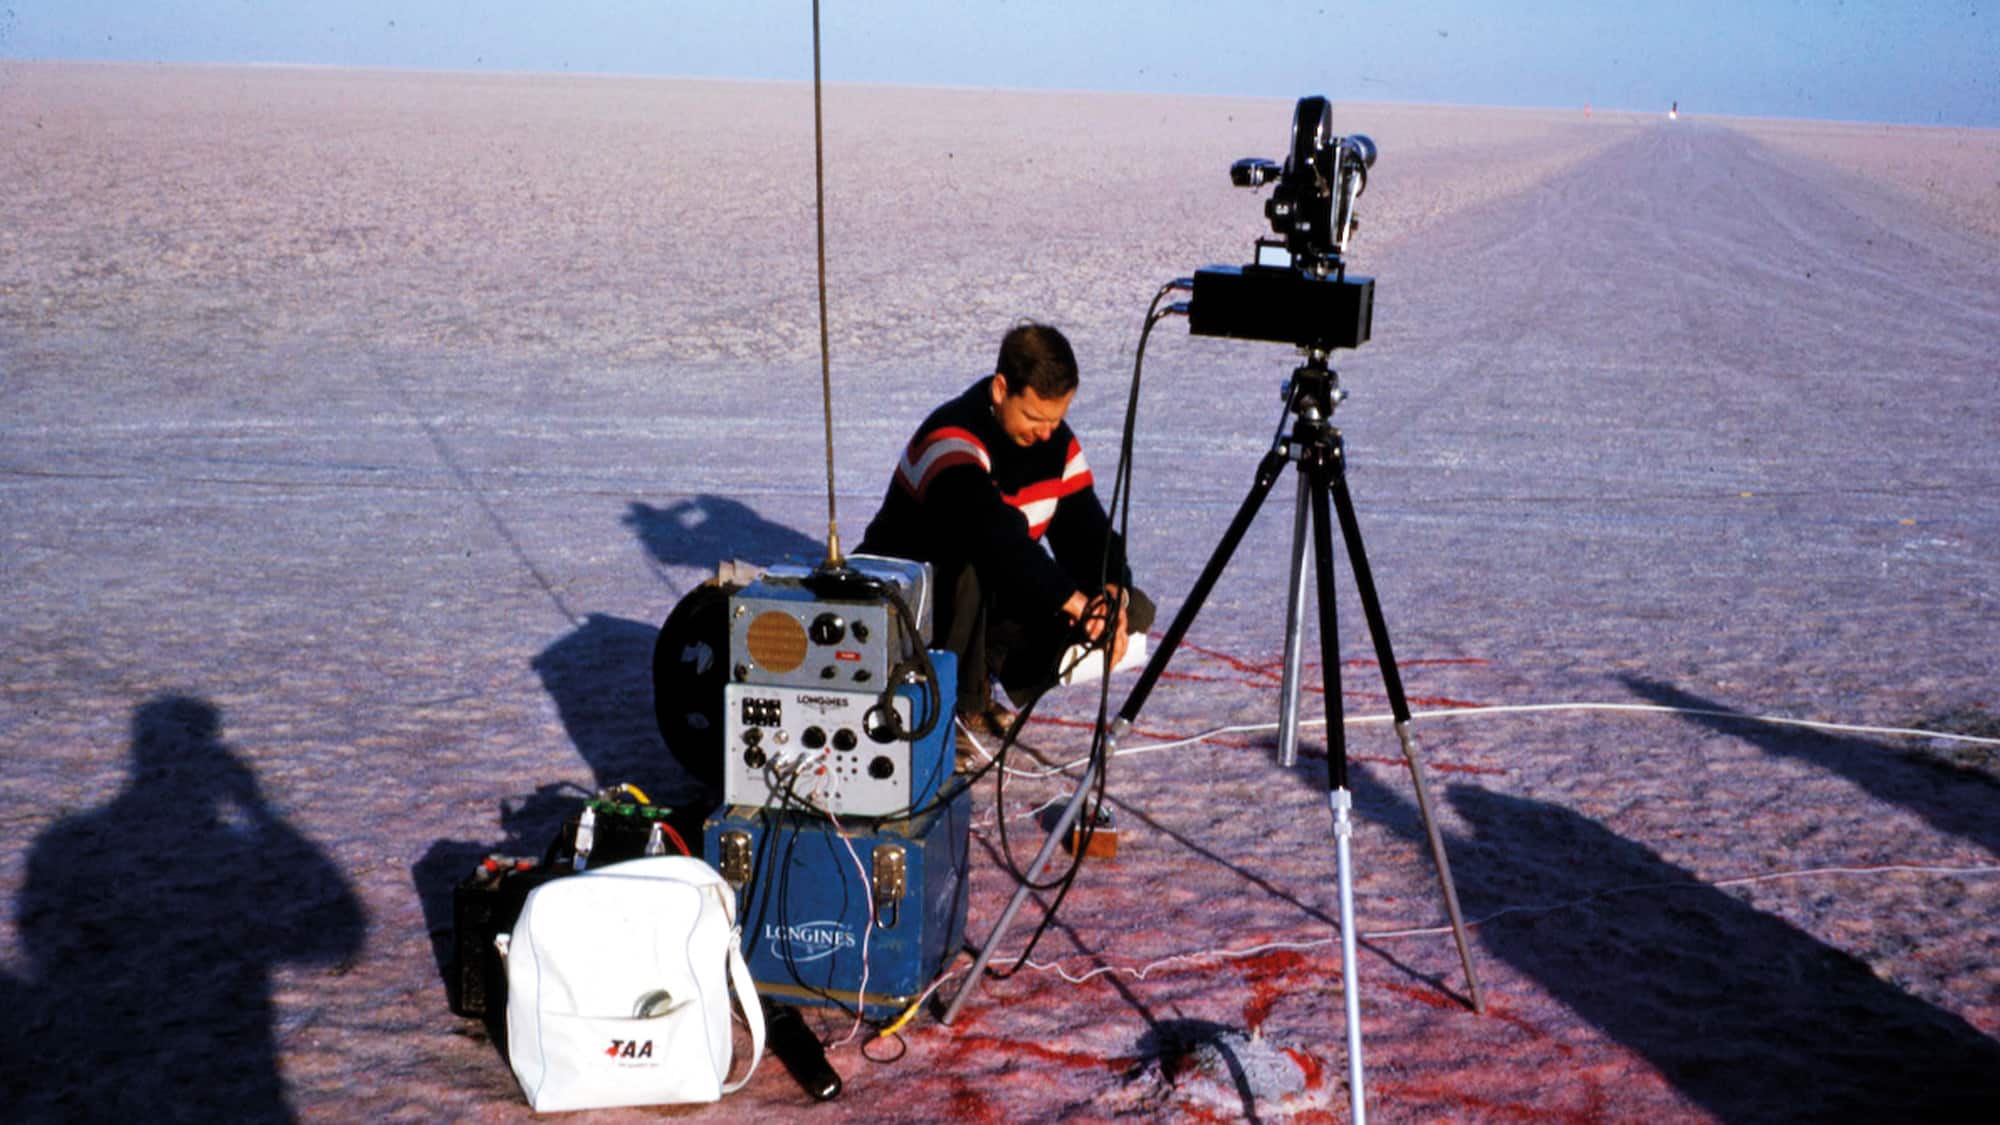 Land speed record timing equipment at Lake Eyre for Donald Campbell Bluebird